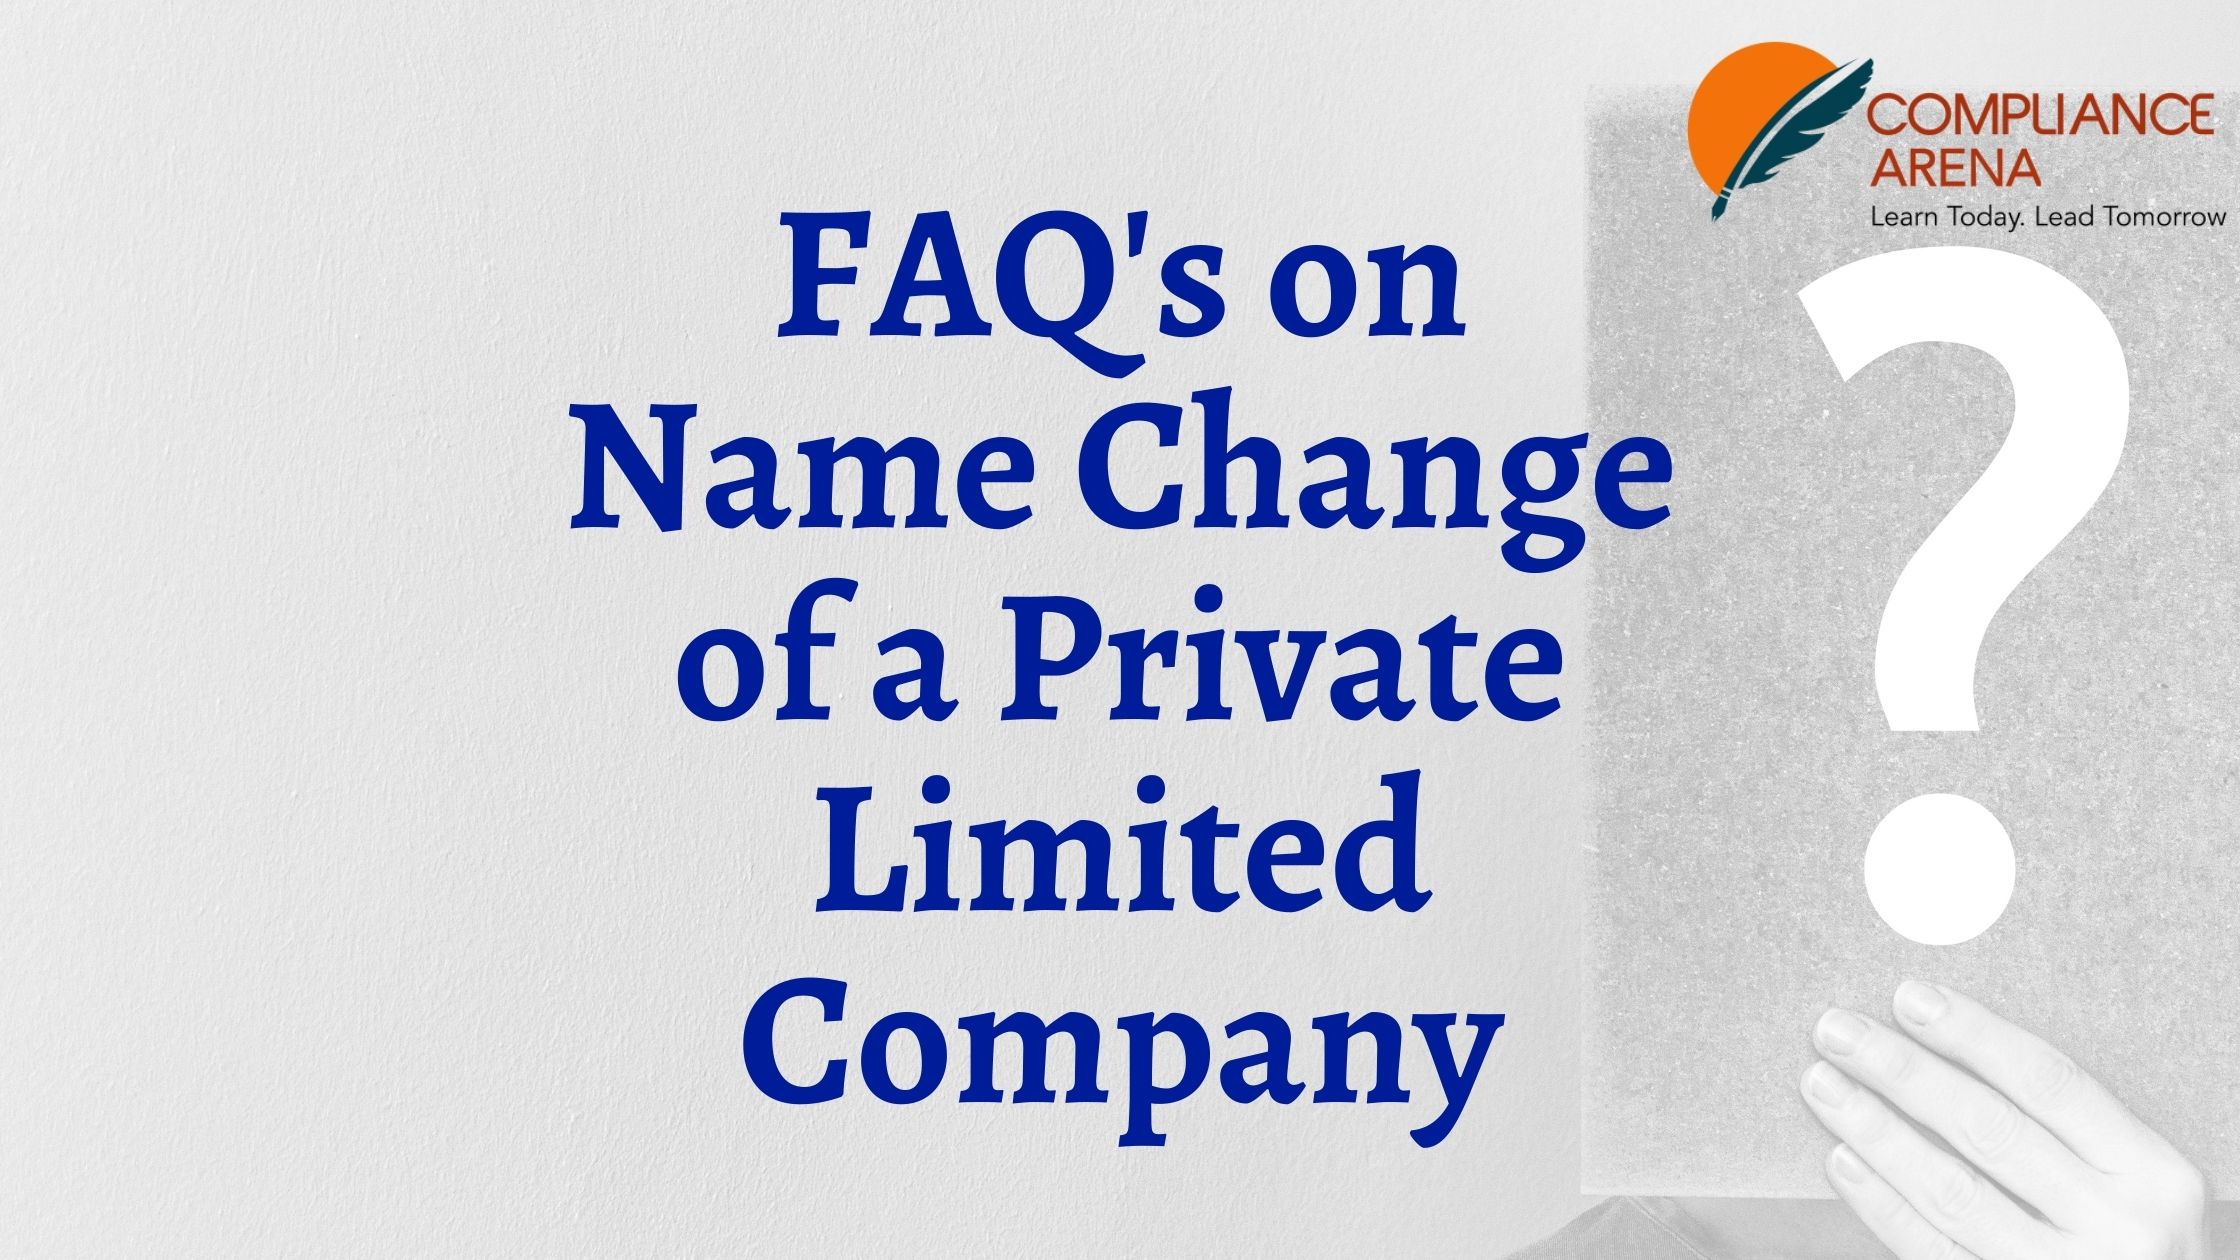 FAQ’s on Name Change of a Private Limited Company